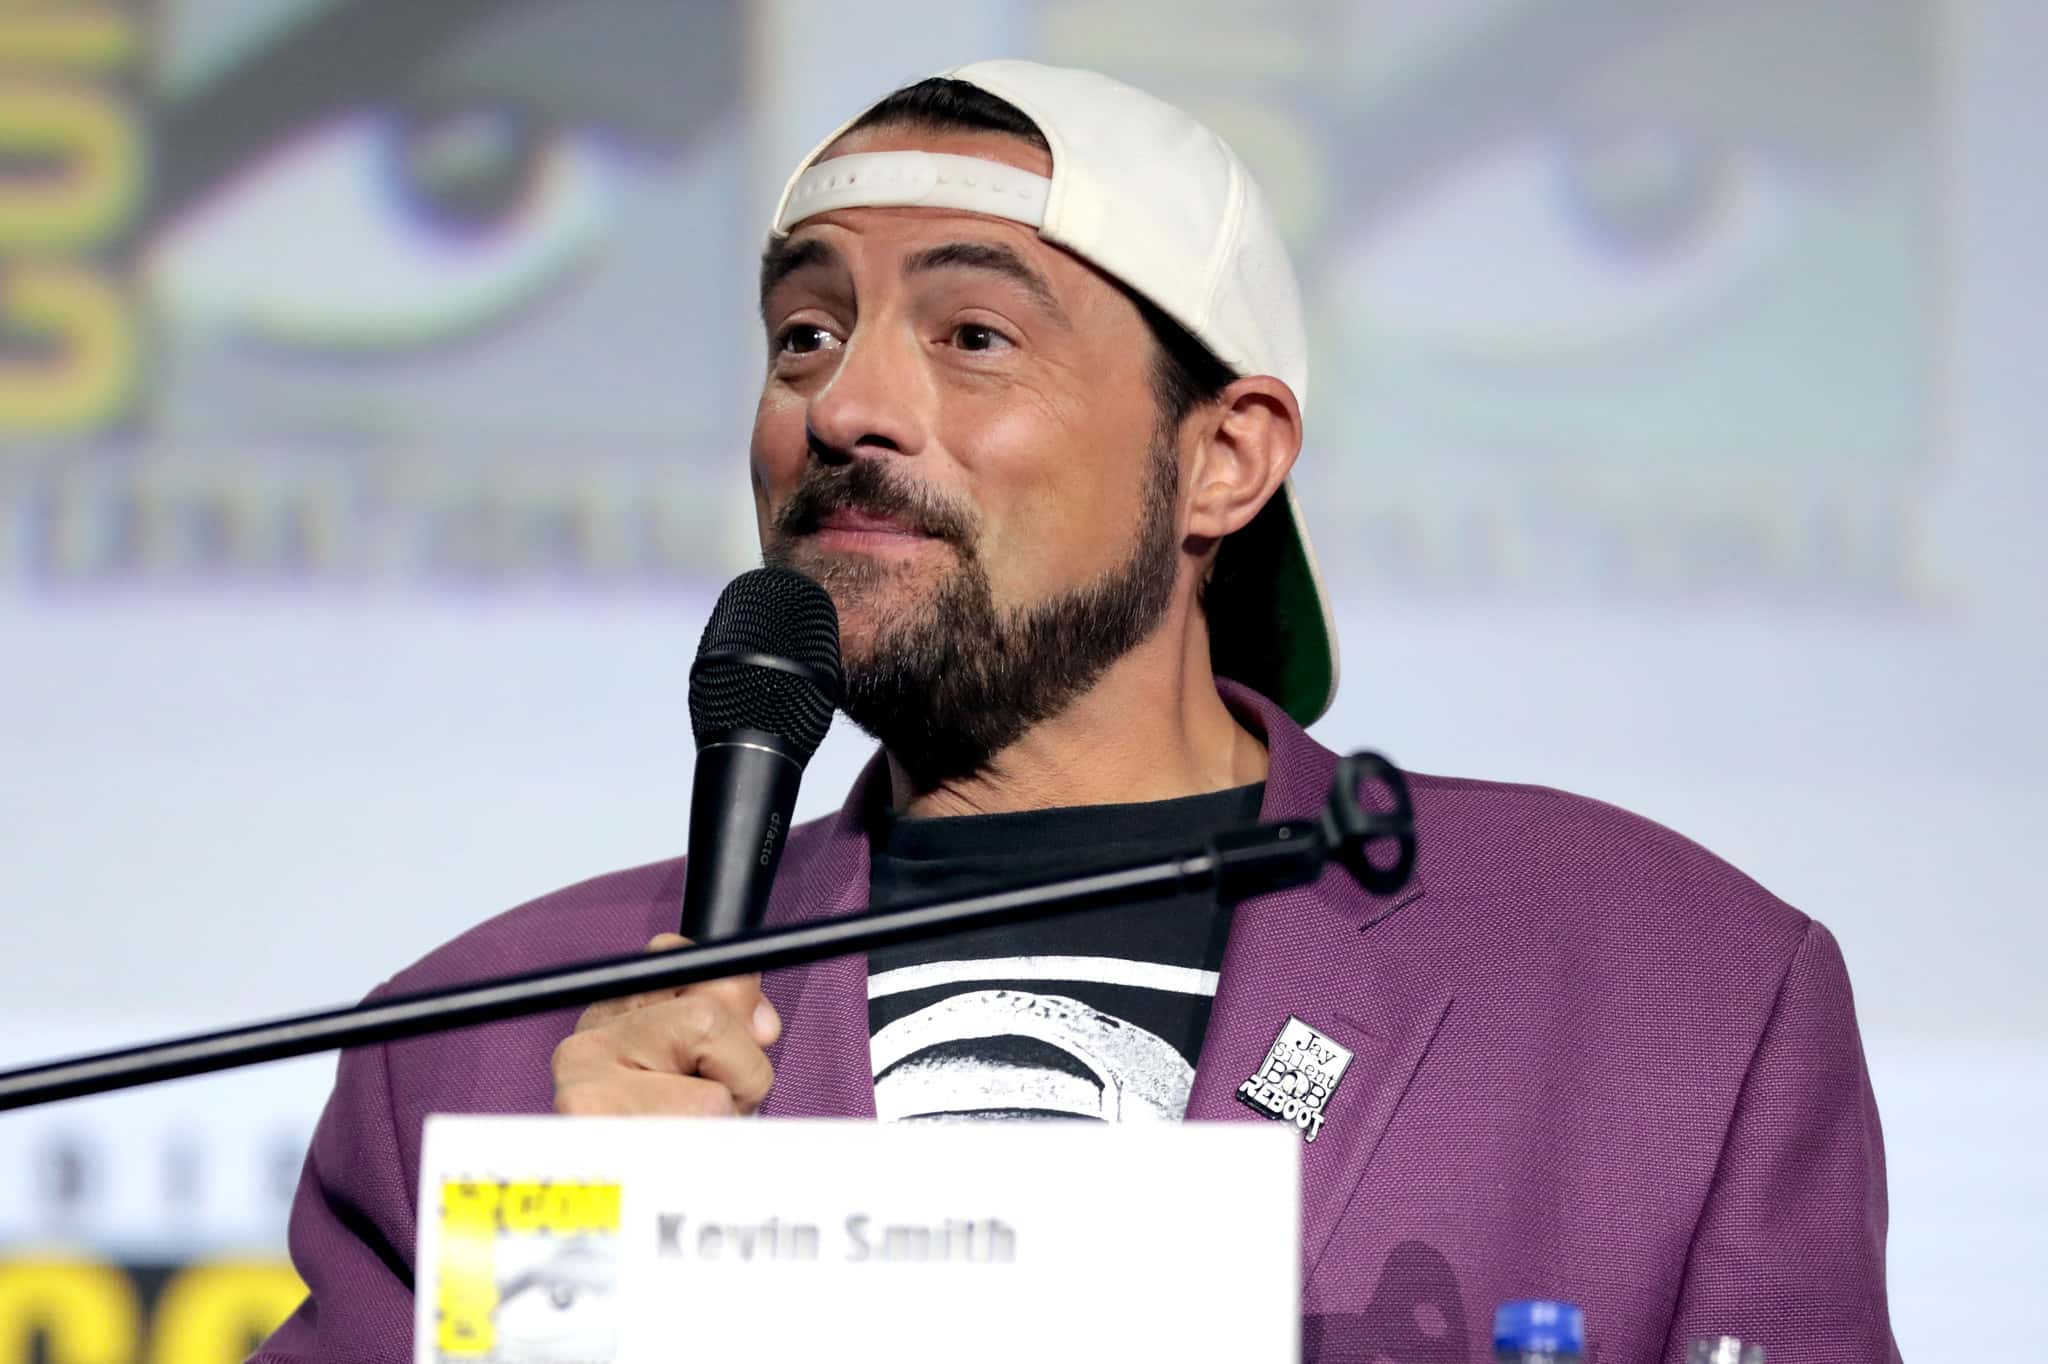 Kevin Smith Films facts